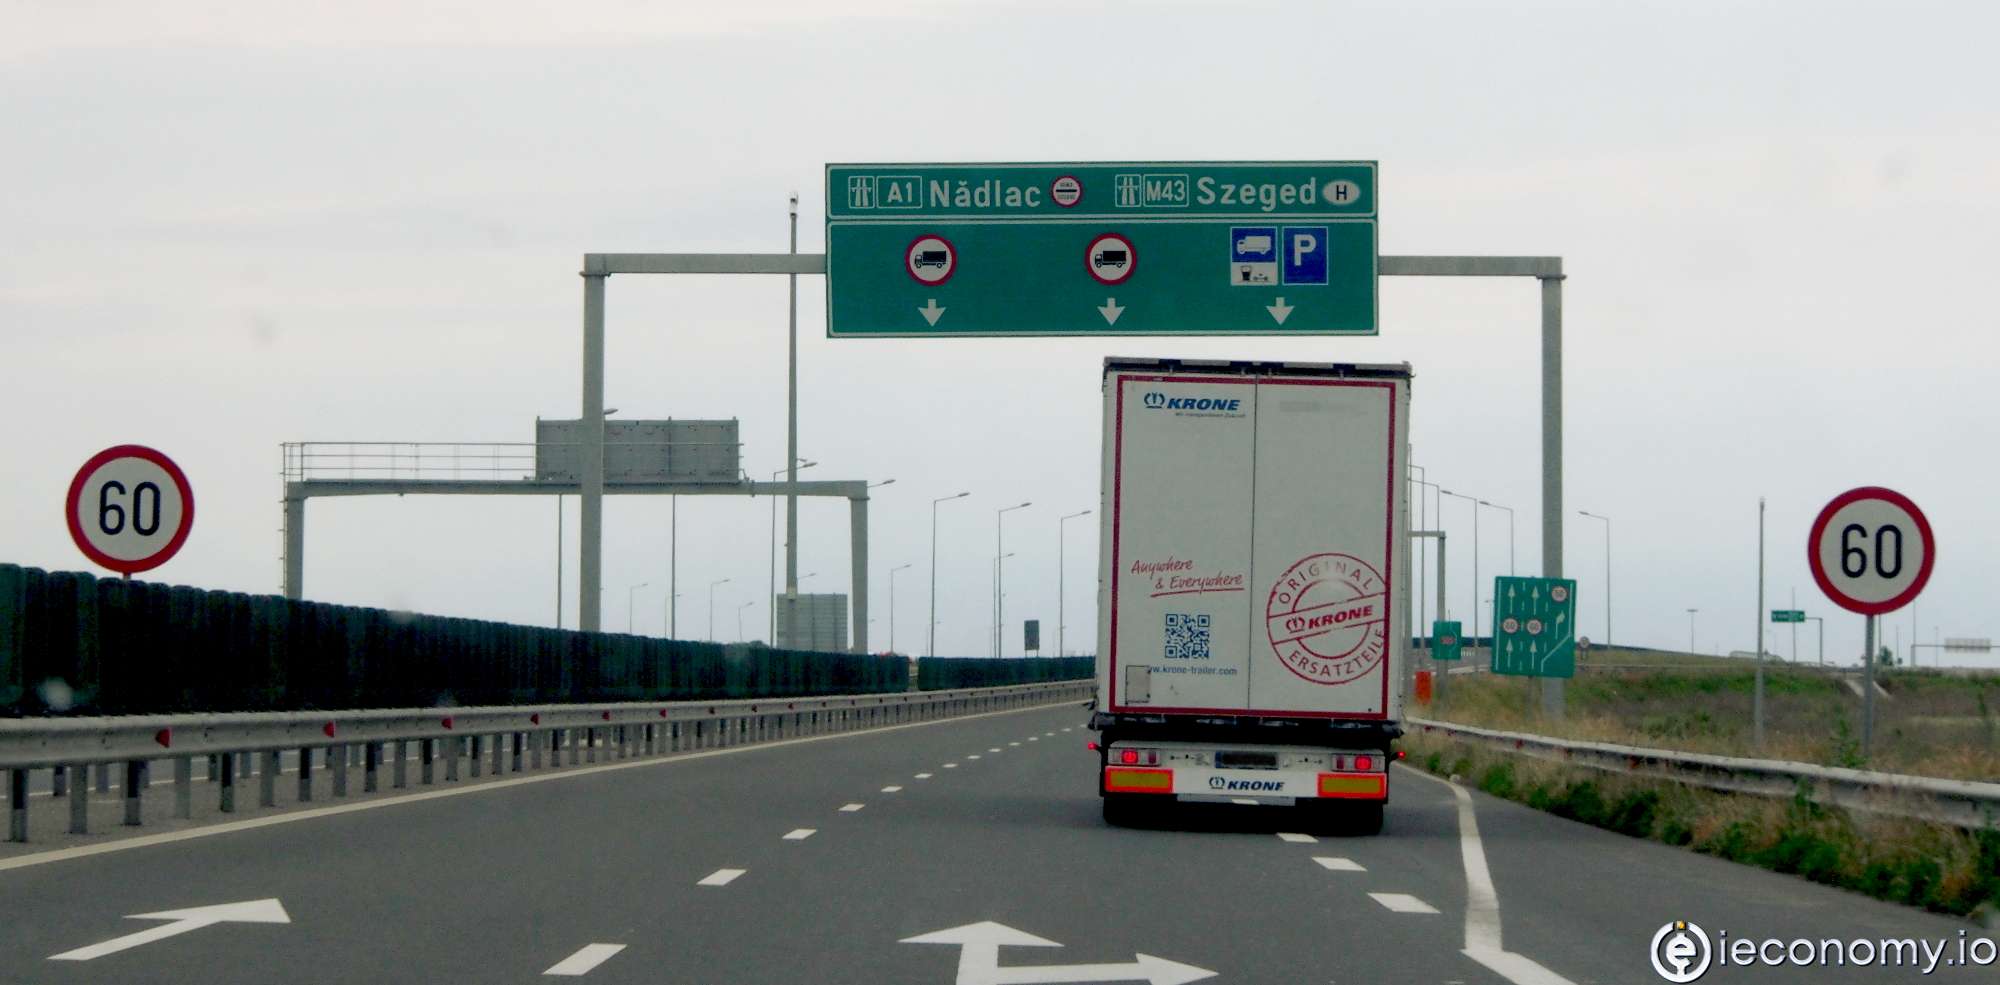 Hungary tightens the envirocategory in the toll system